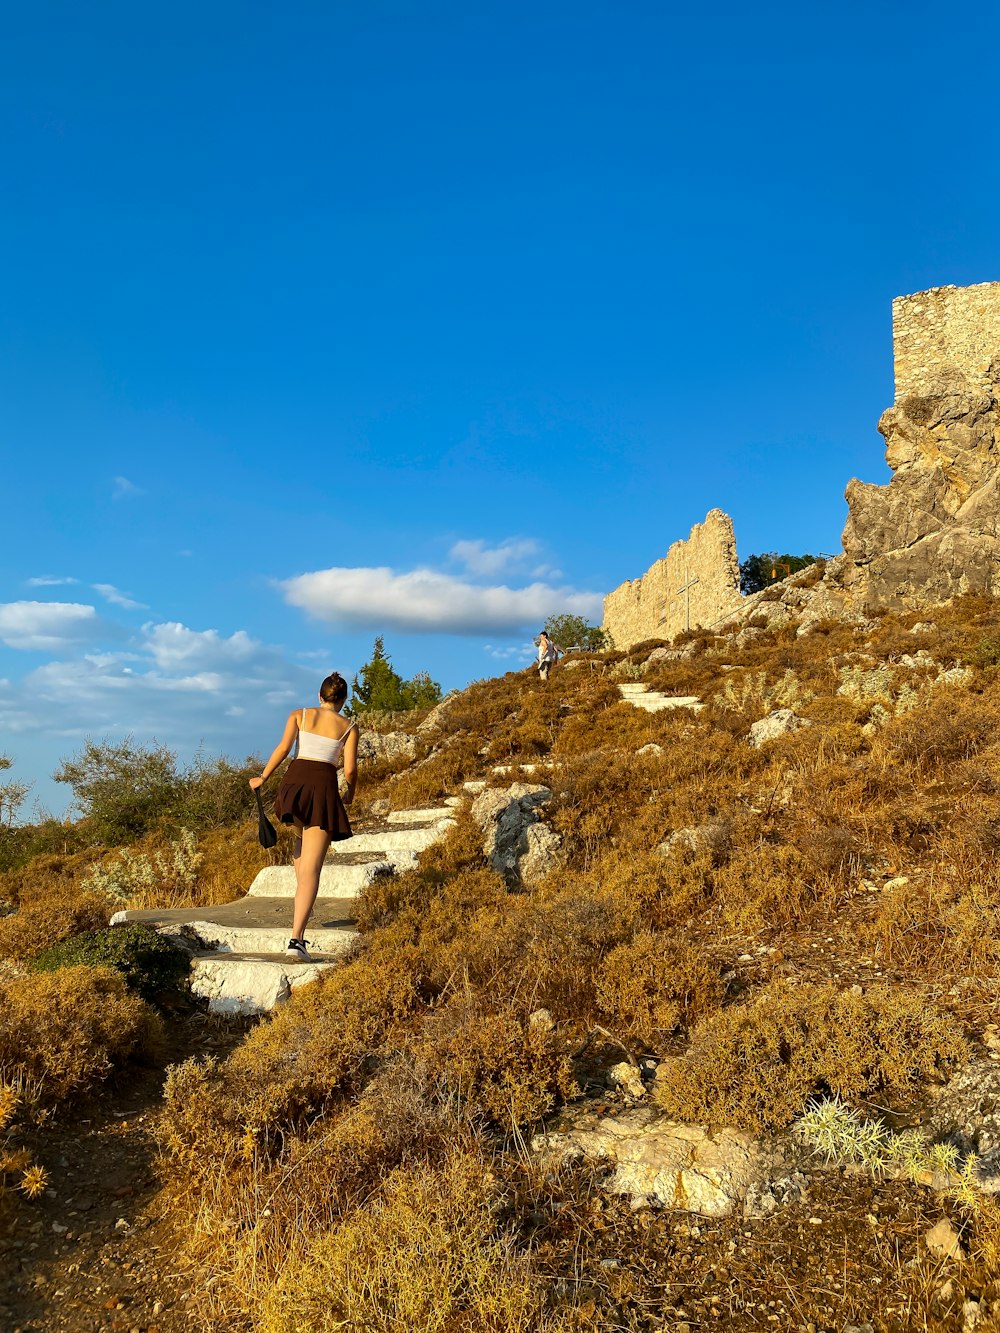 a person walking on a path in a rocky area